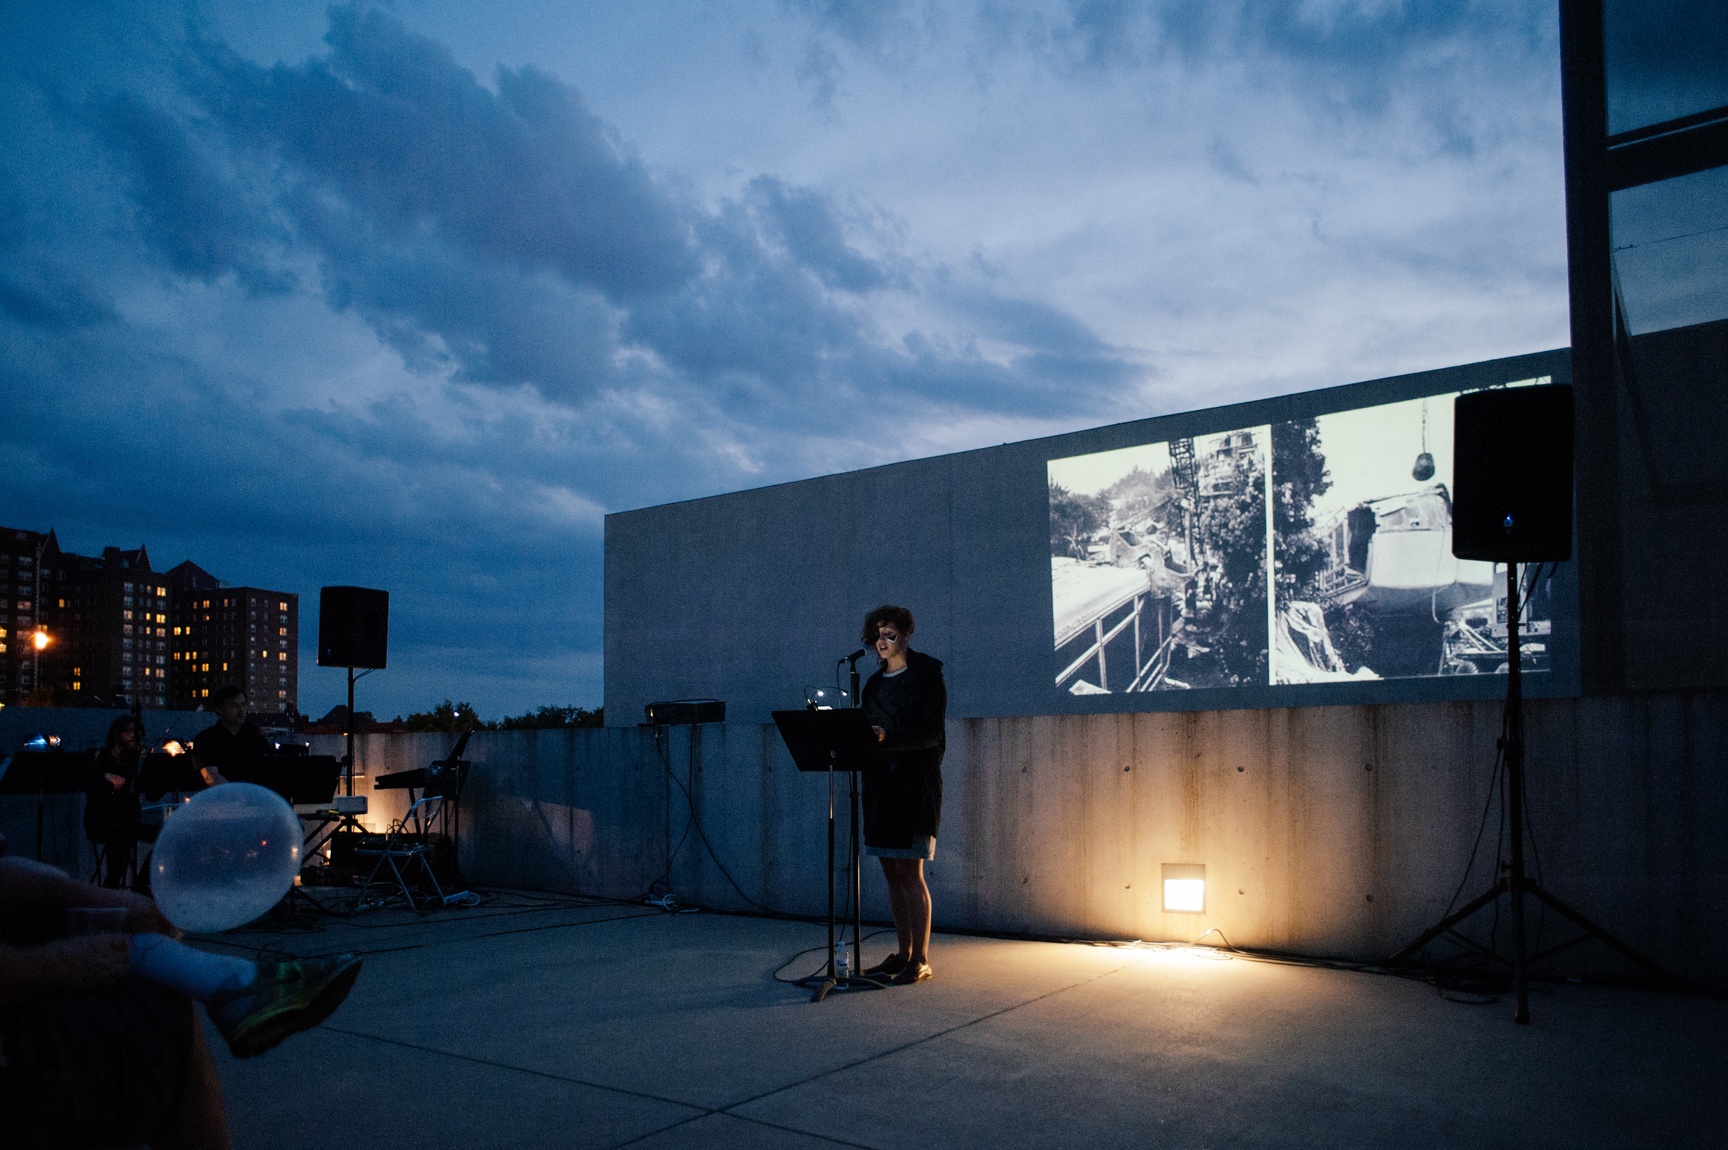 During an evening event in the Courtyard, a presenter speaks into a microphone in front of a podium, with images projected on the concrete wall behind them.